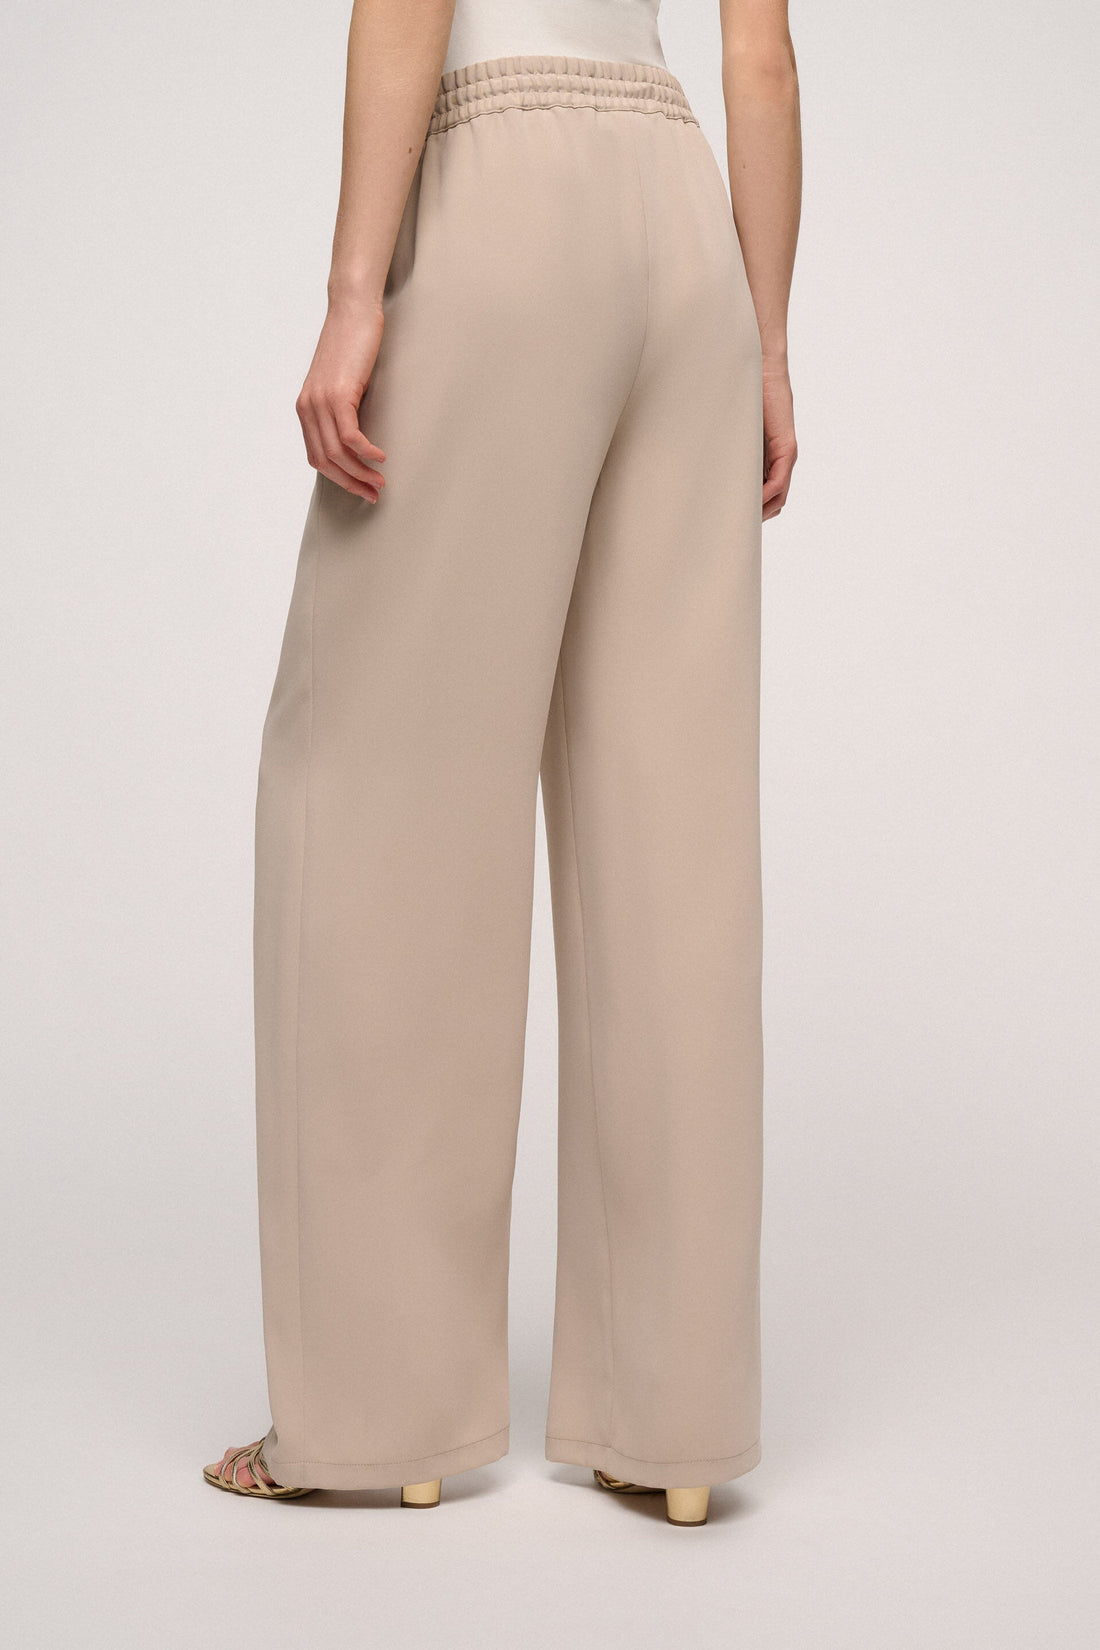 Wide Leg Slip On Trousers With Drawstring_Angelica C_1137_02